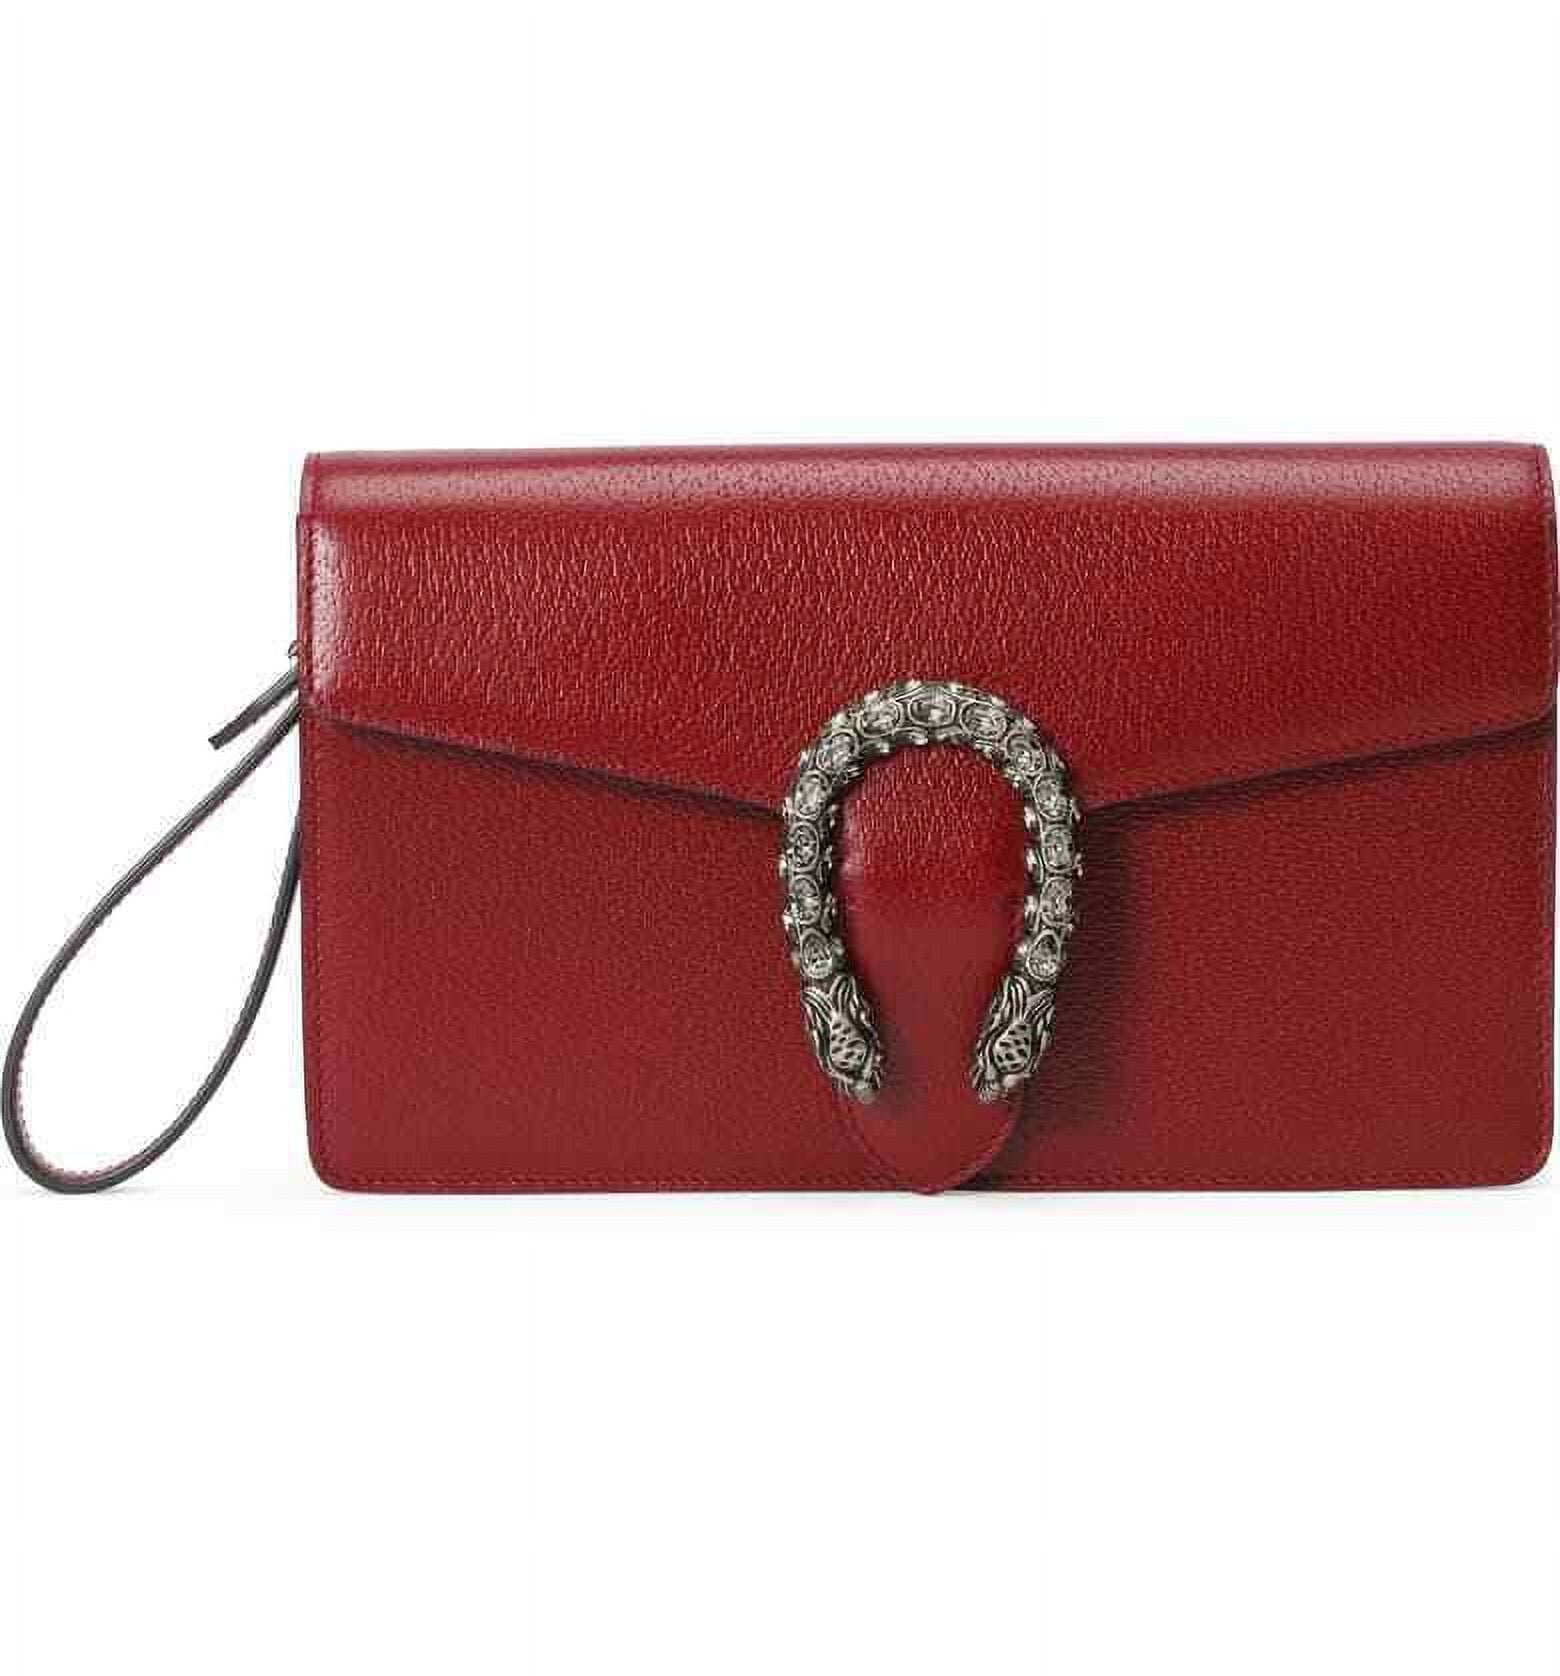 Gucci Blondie small shoulder bag in red leather | GUCCI® US